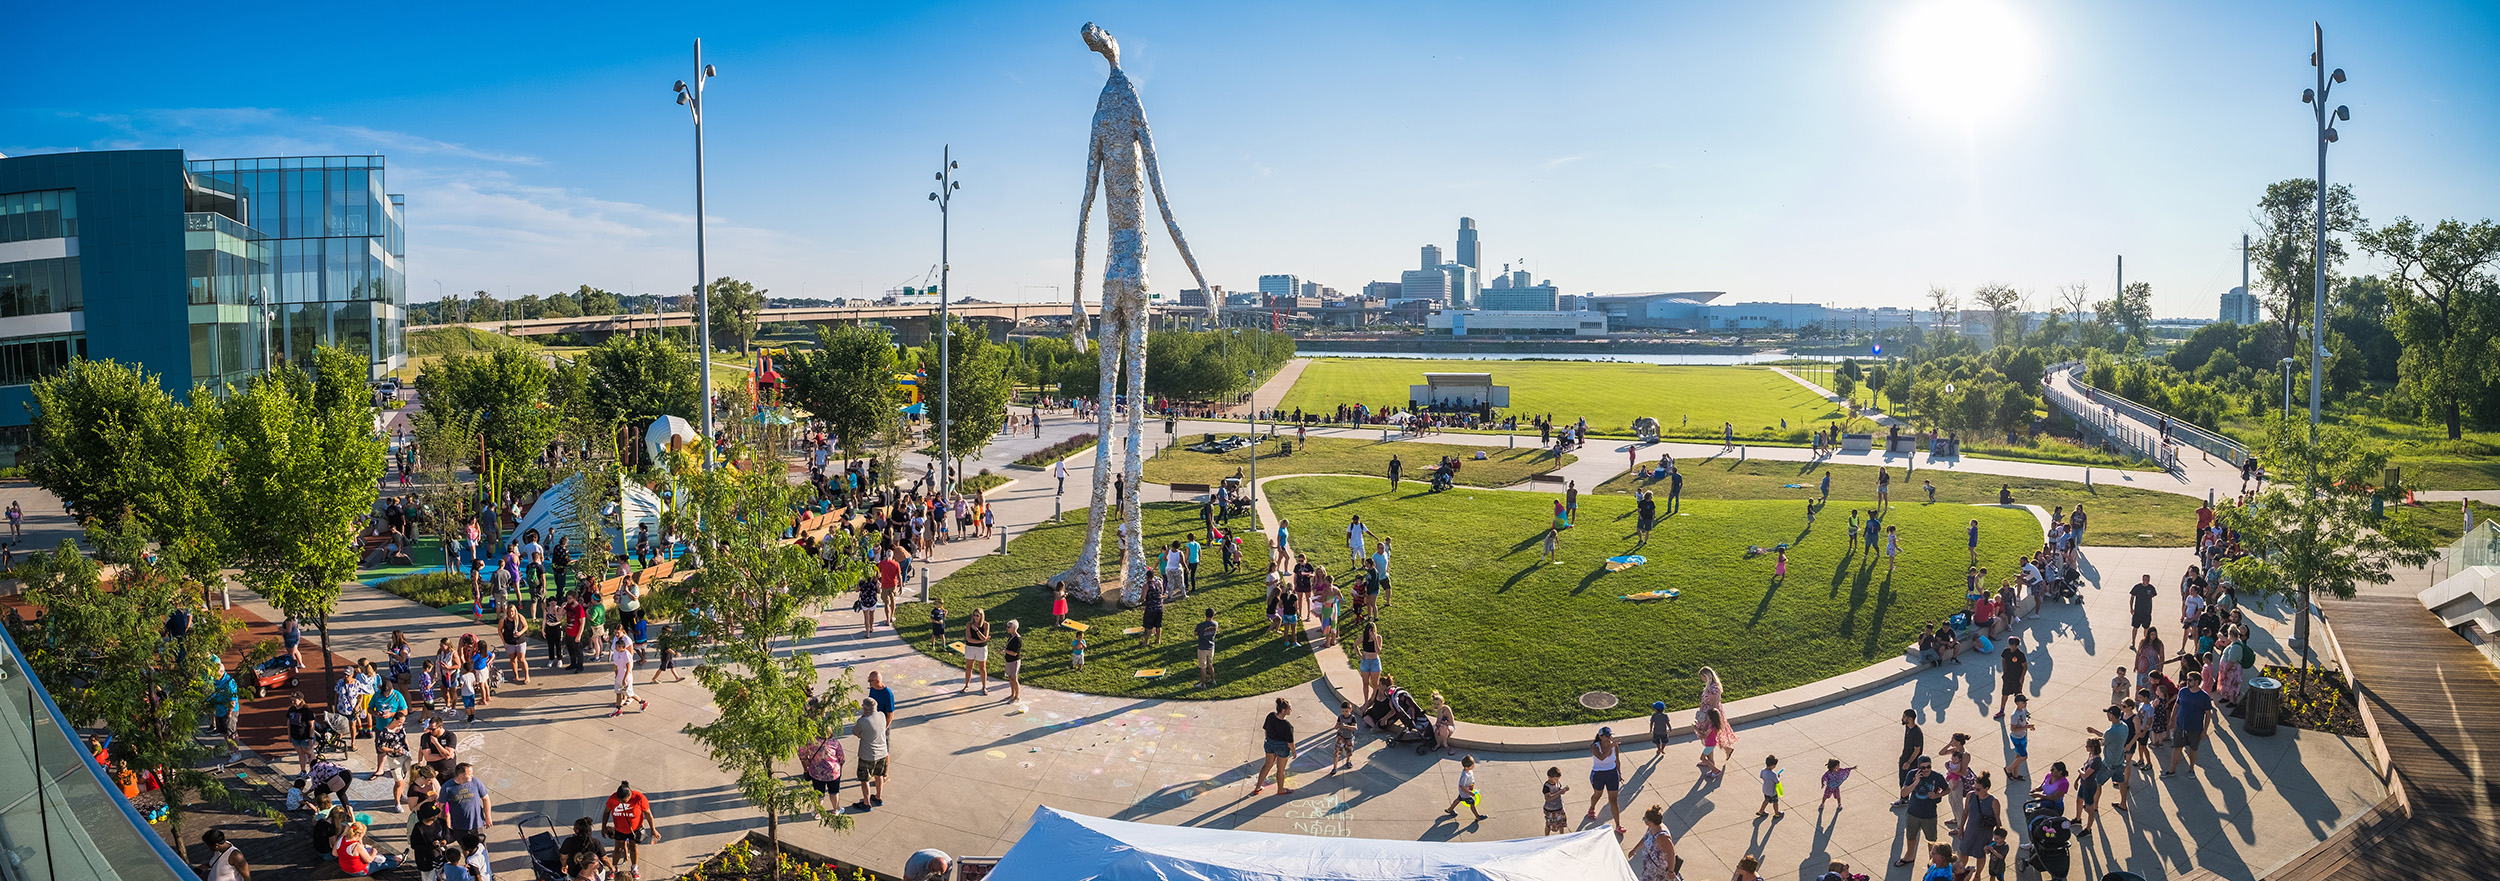 Bird's eye view of crowd of people and large sculptures at River's Edge park in Council Bluffs, Iowa